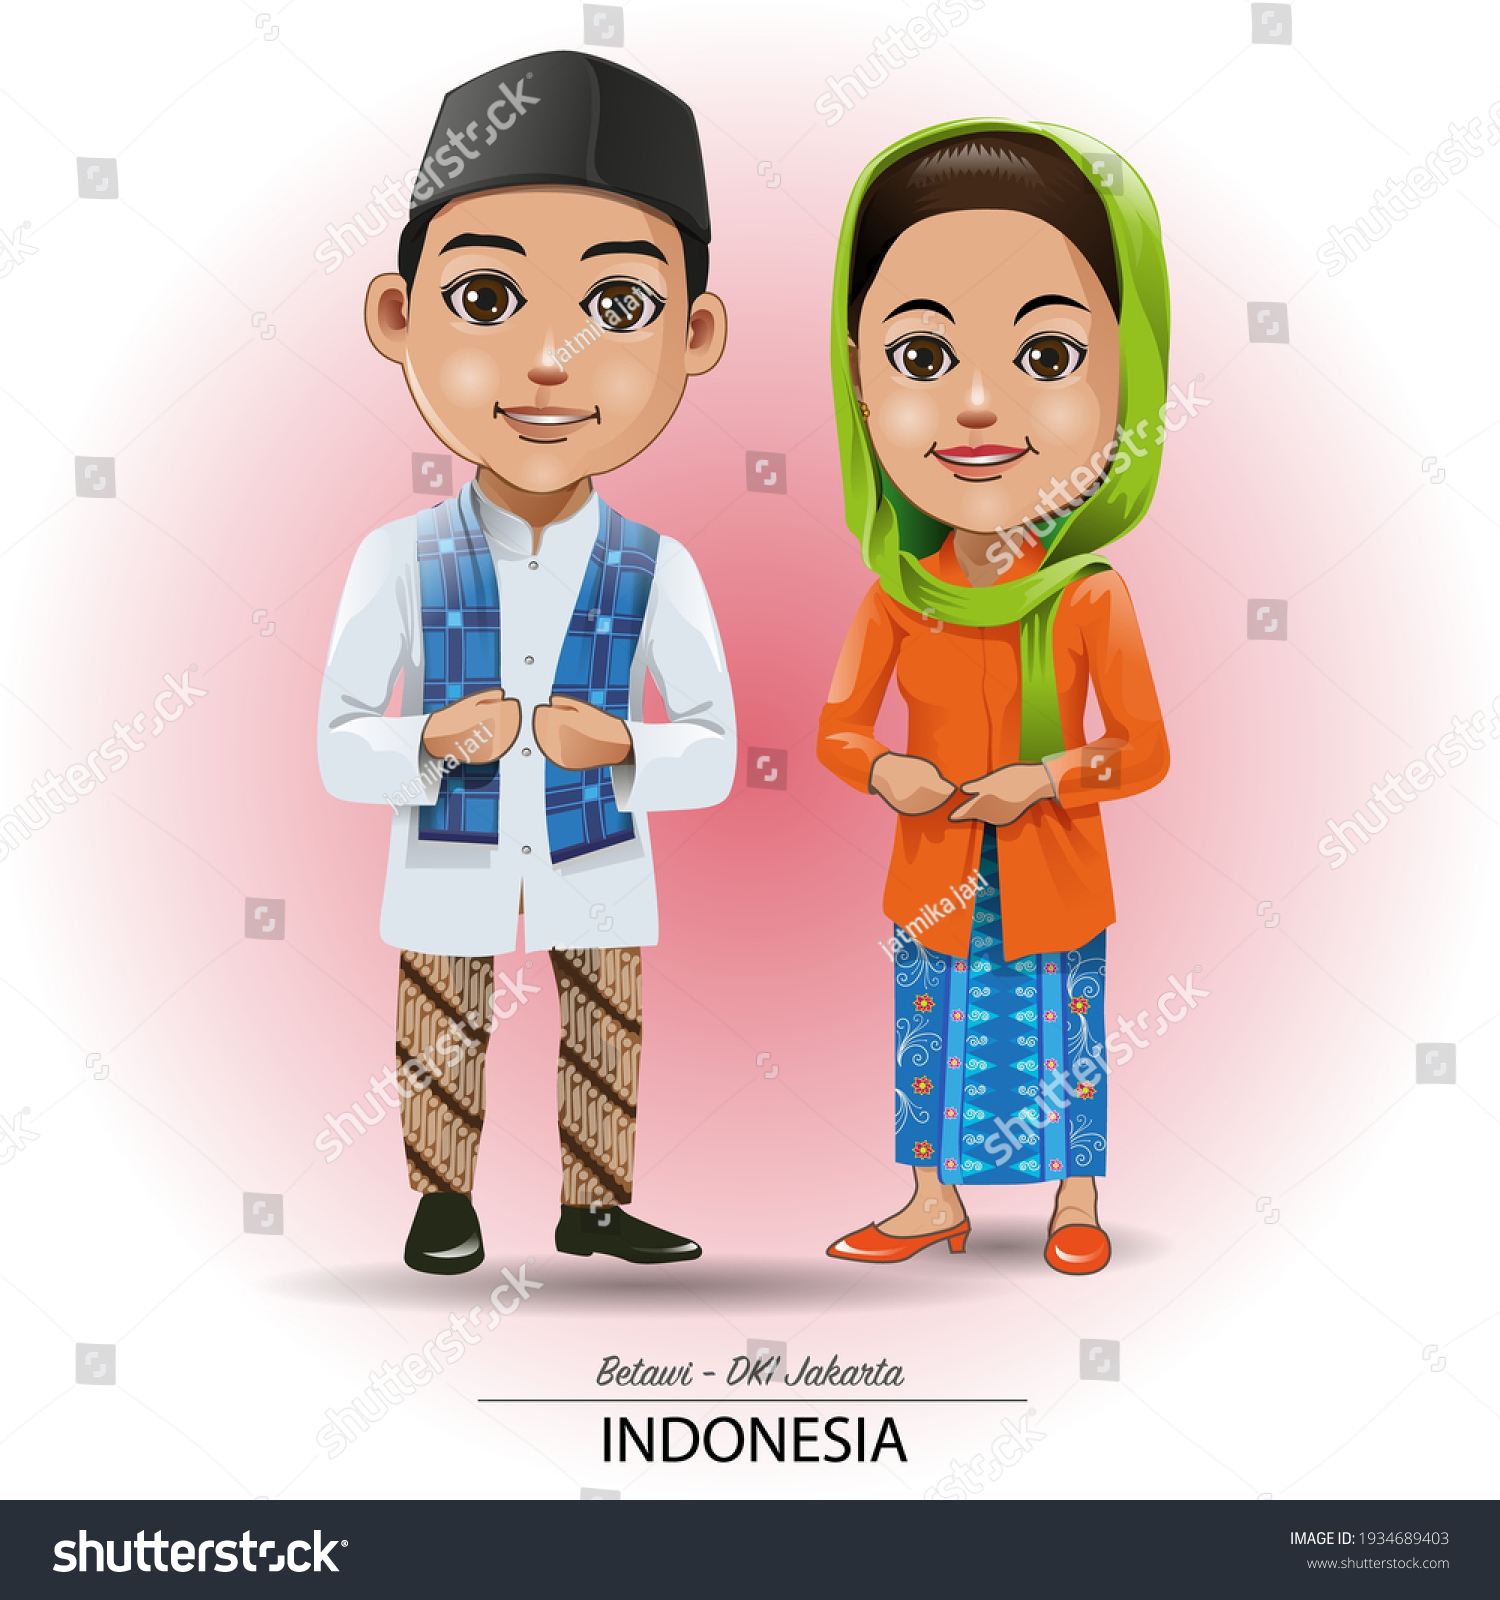 SVG of Vector illustration, traditional clothing of the Betawi tribe, DKI Jakarta svg